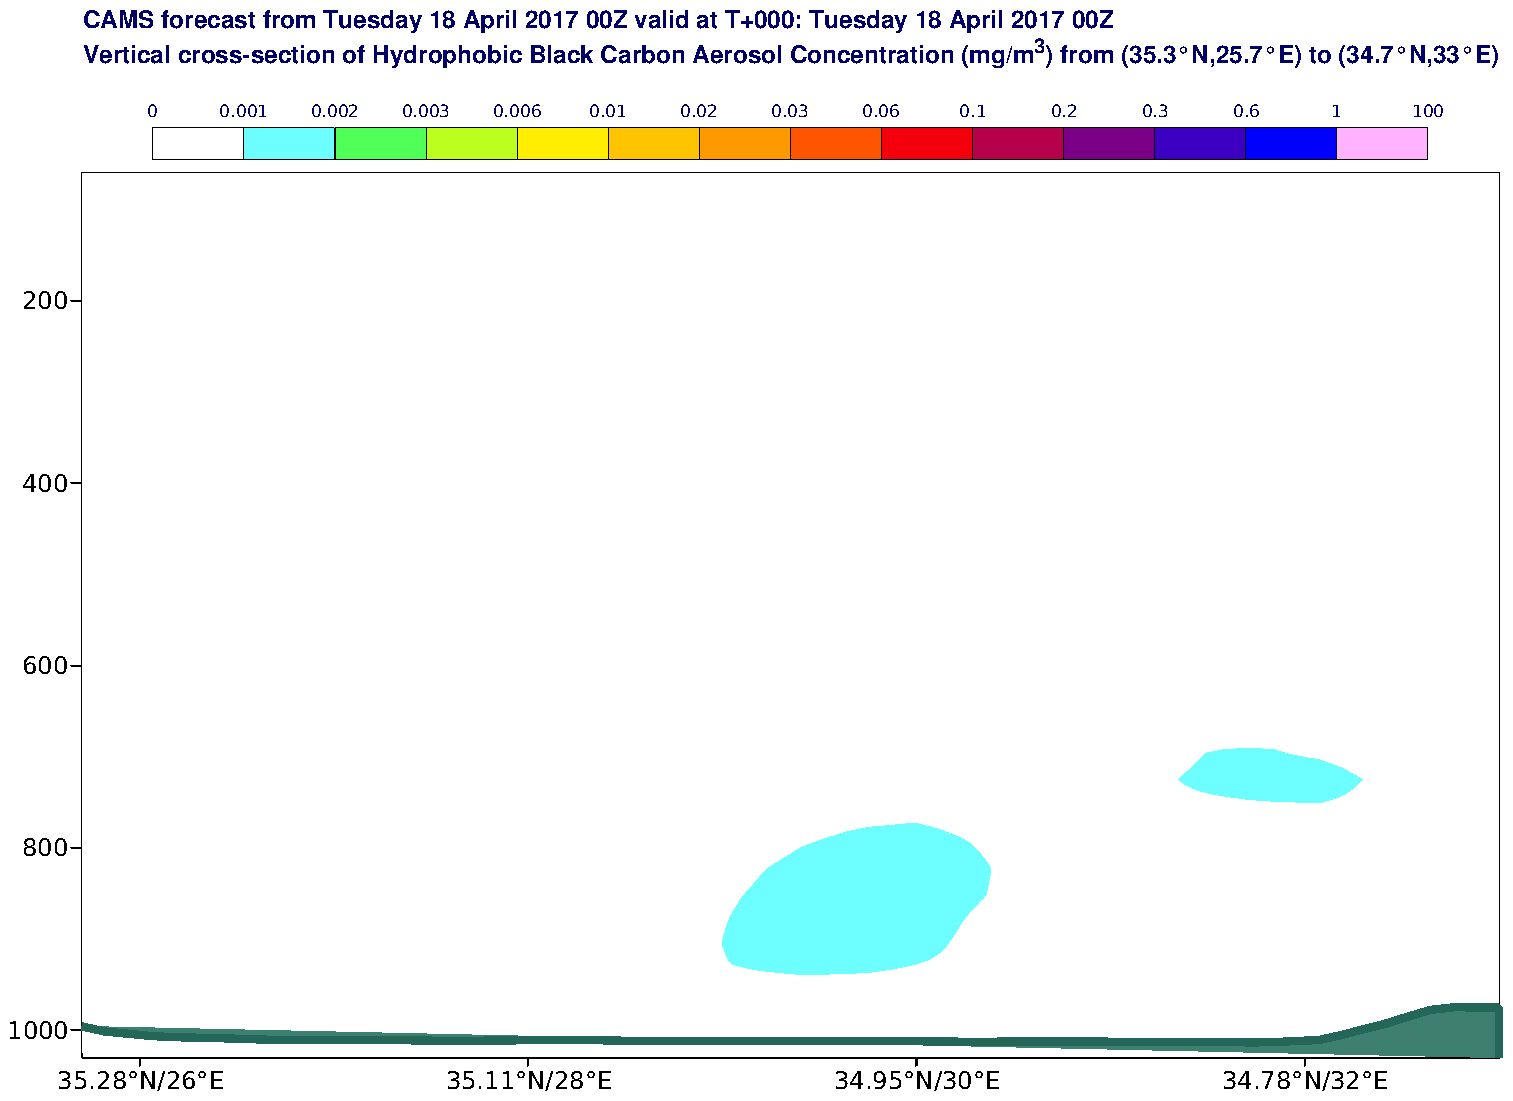 Vertical cross-section of Hydrophobic Black Carbon Aerosol Concentration (mg/m3) valid at T0 - 2017-04-18 00:00